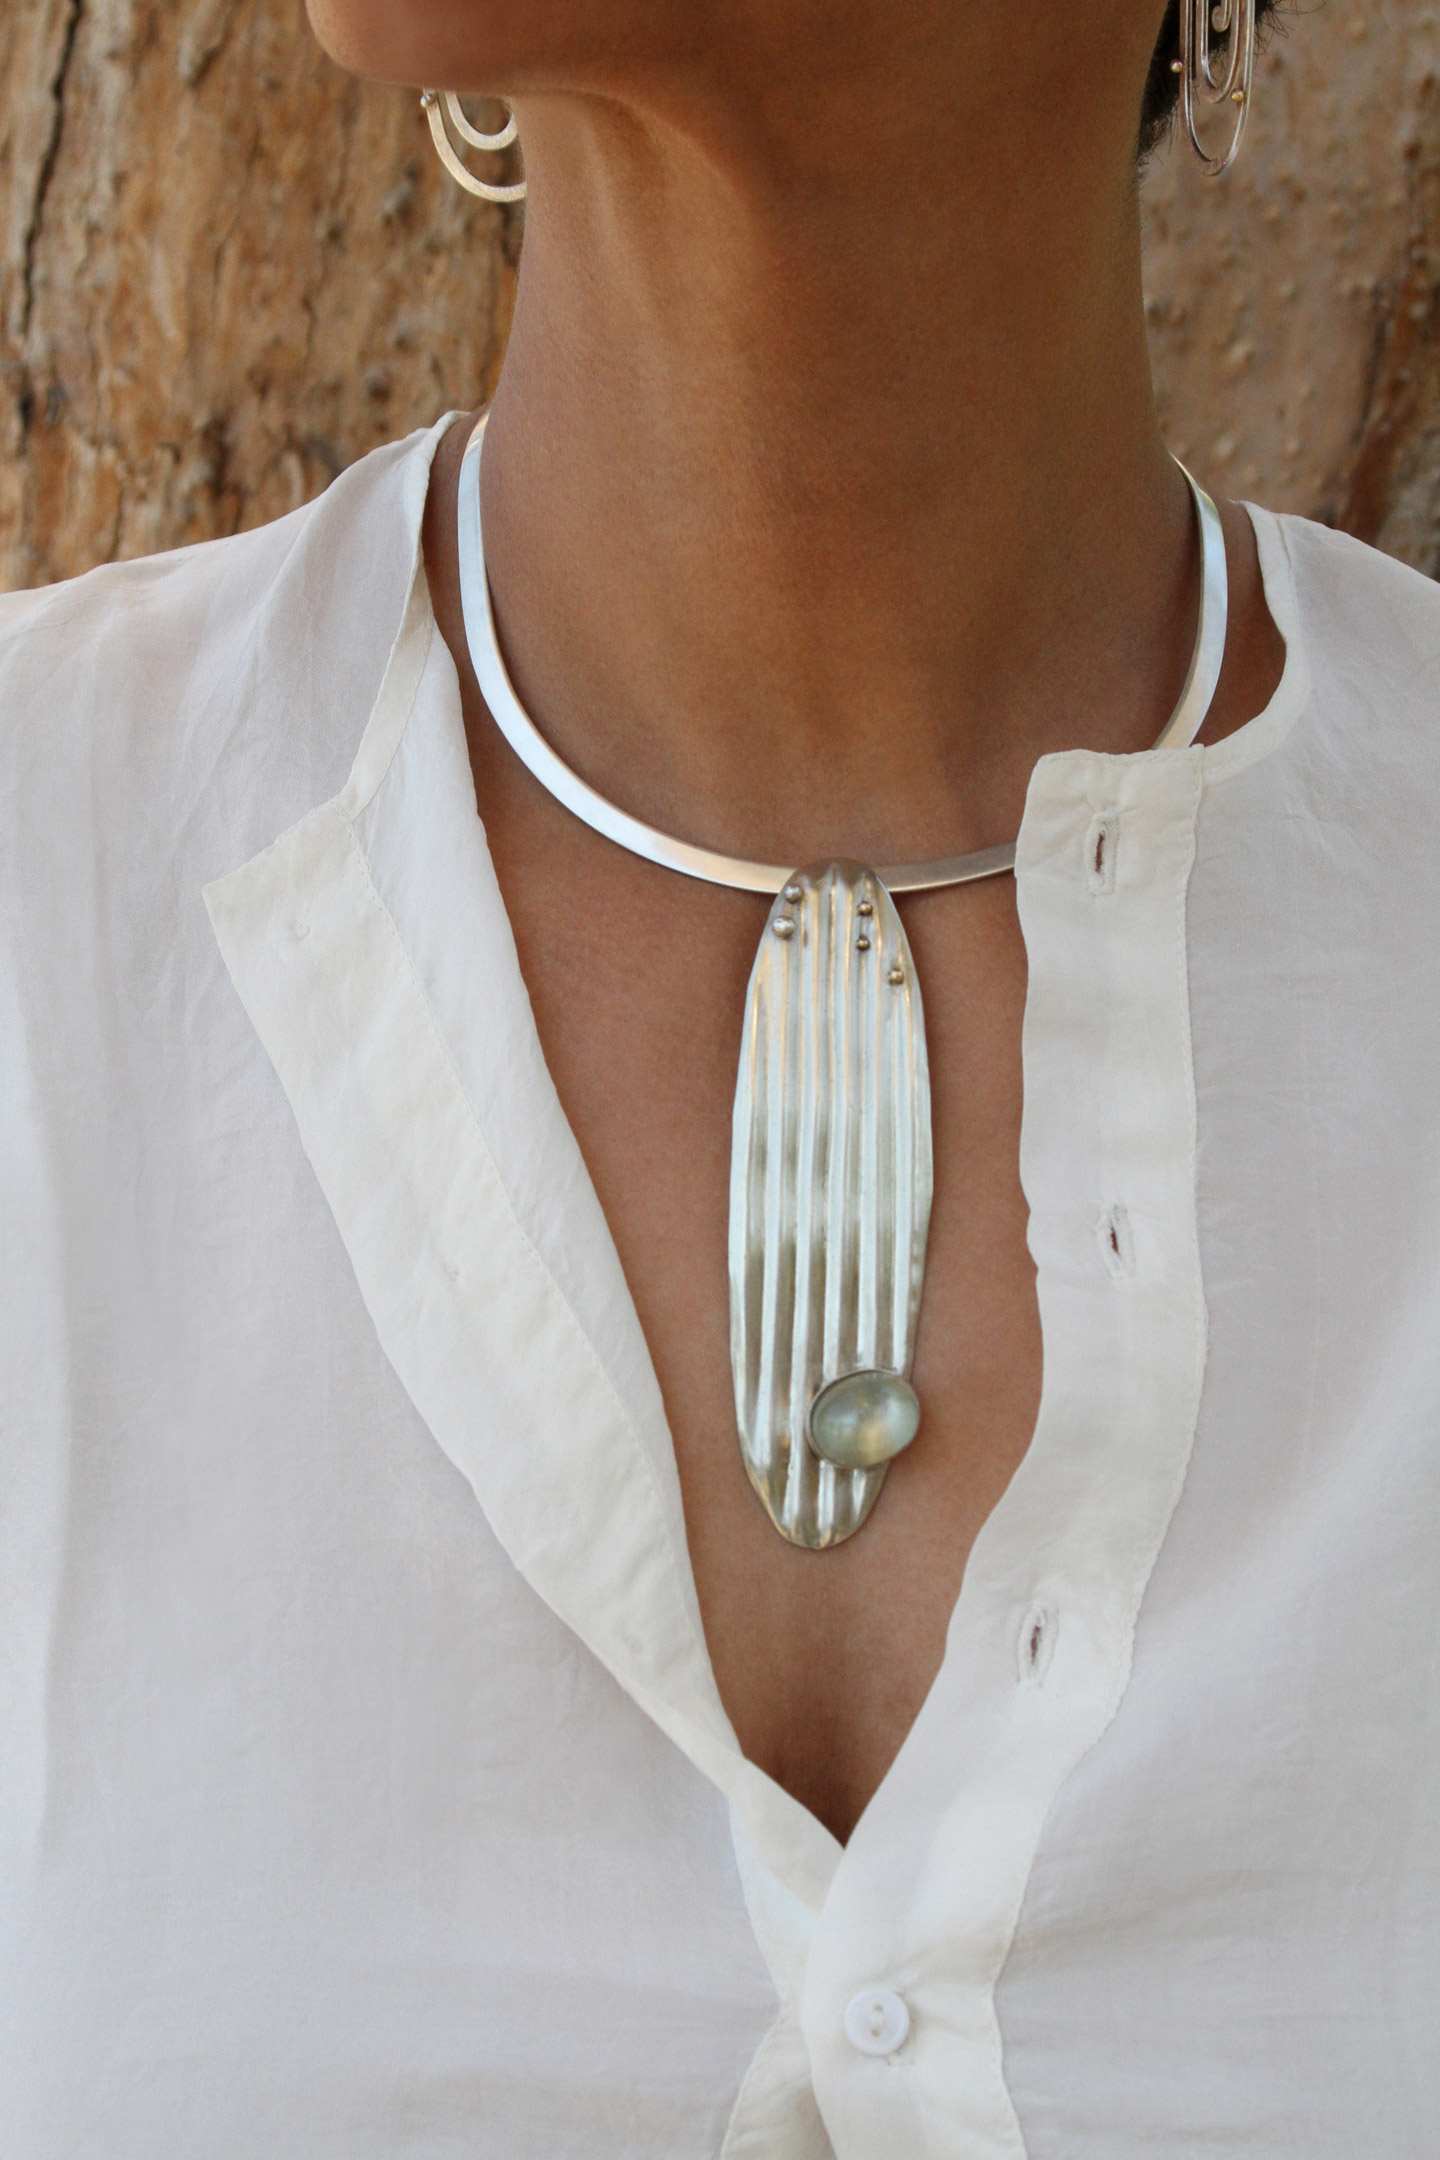 surf necklace